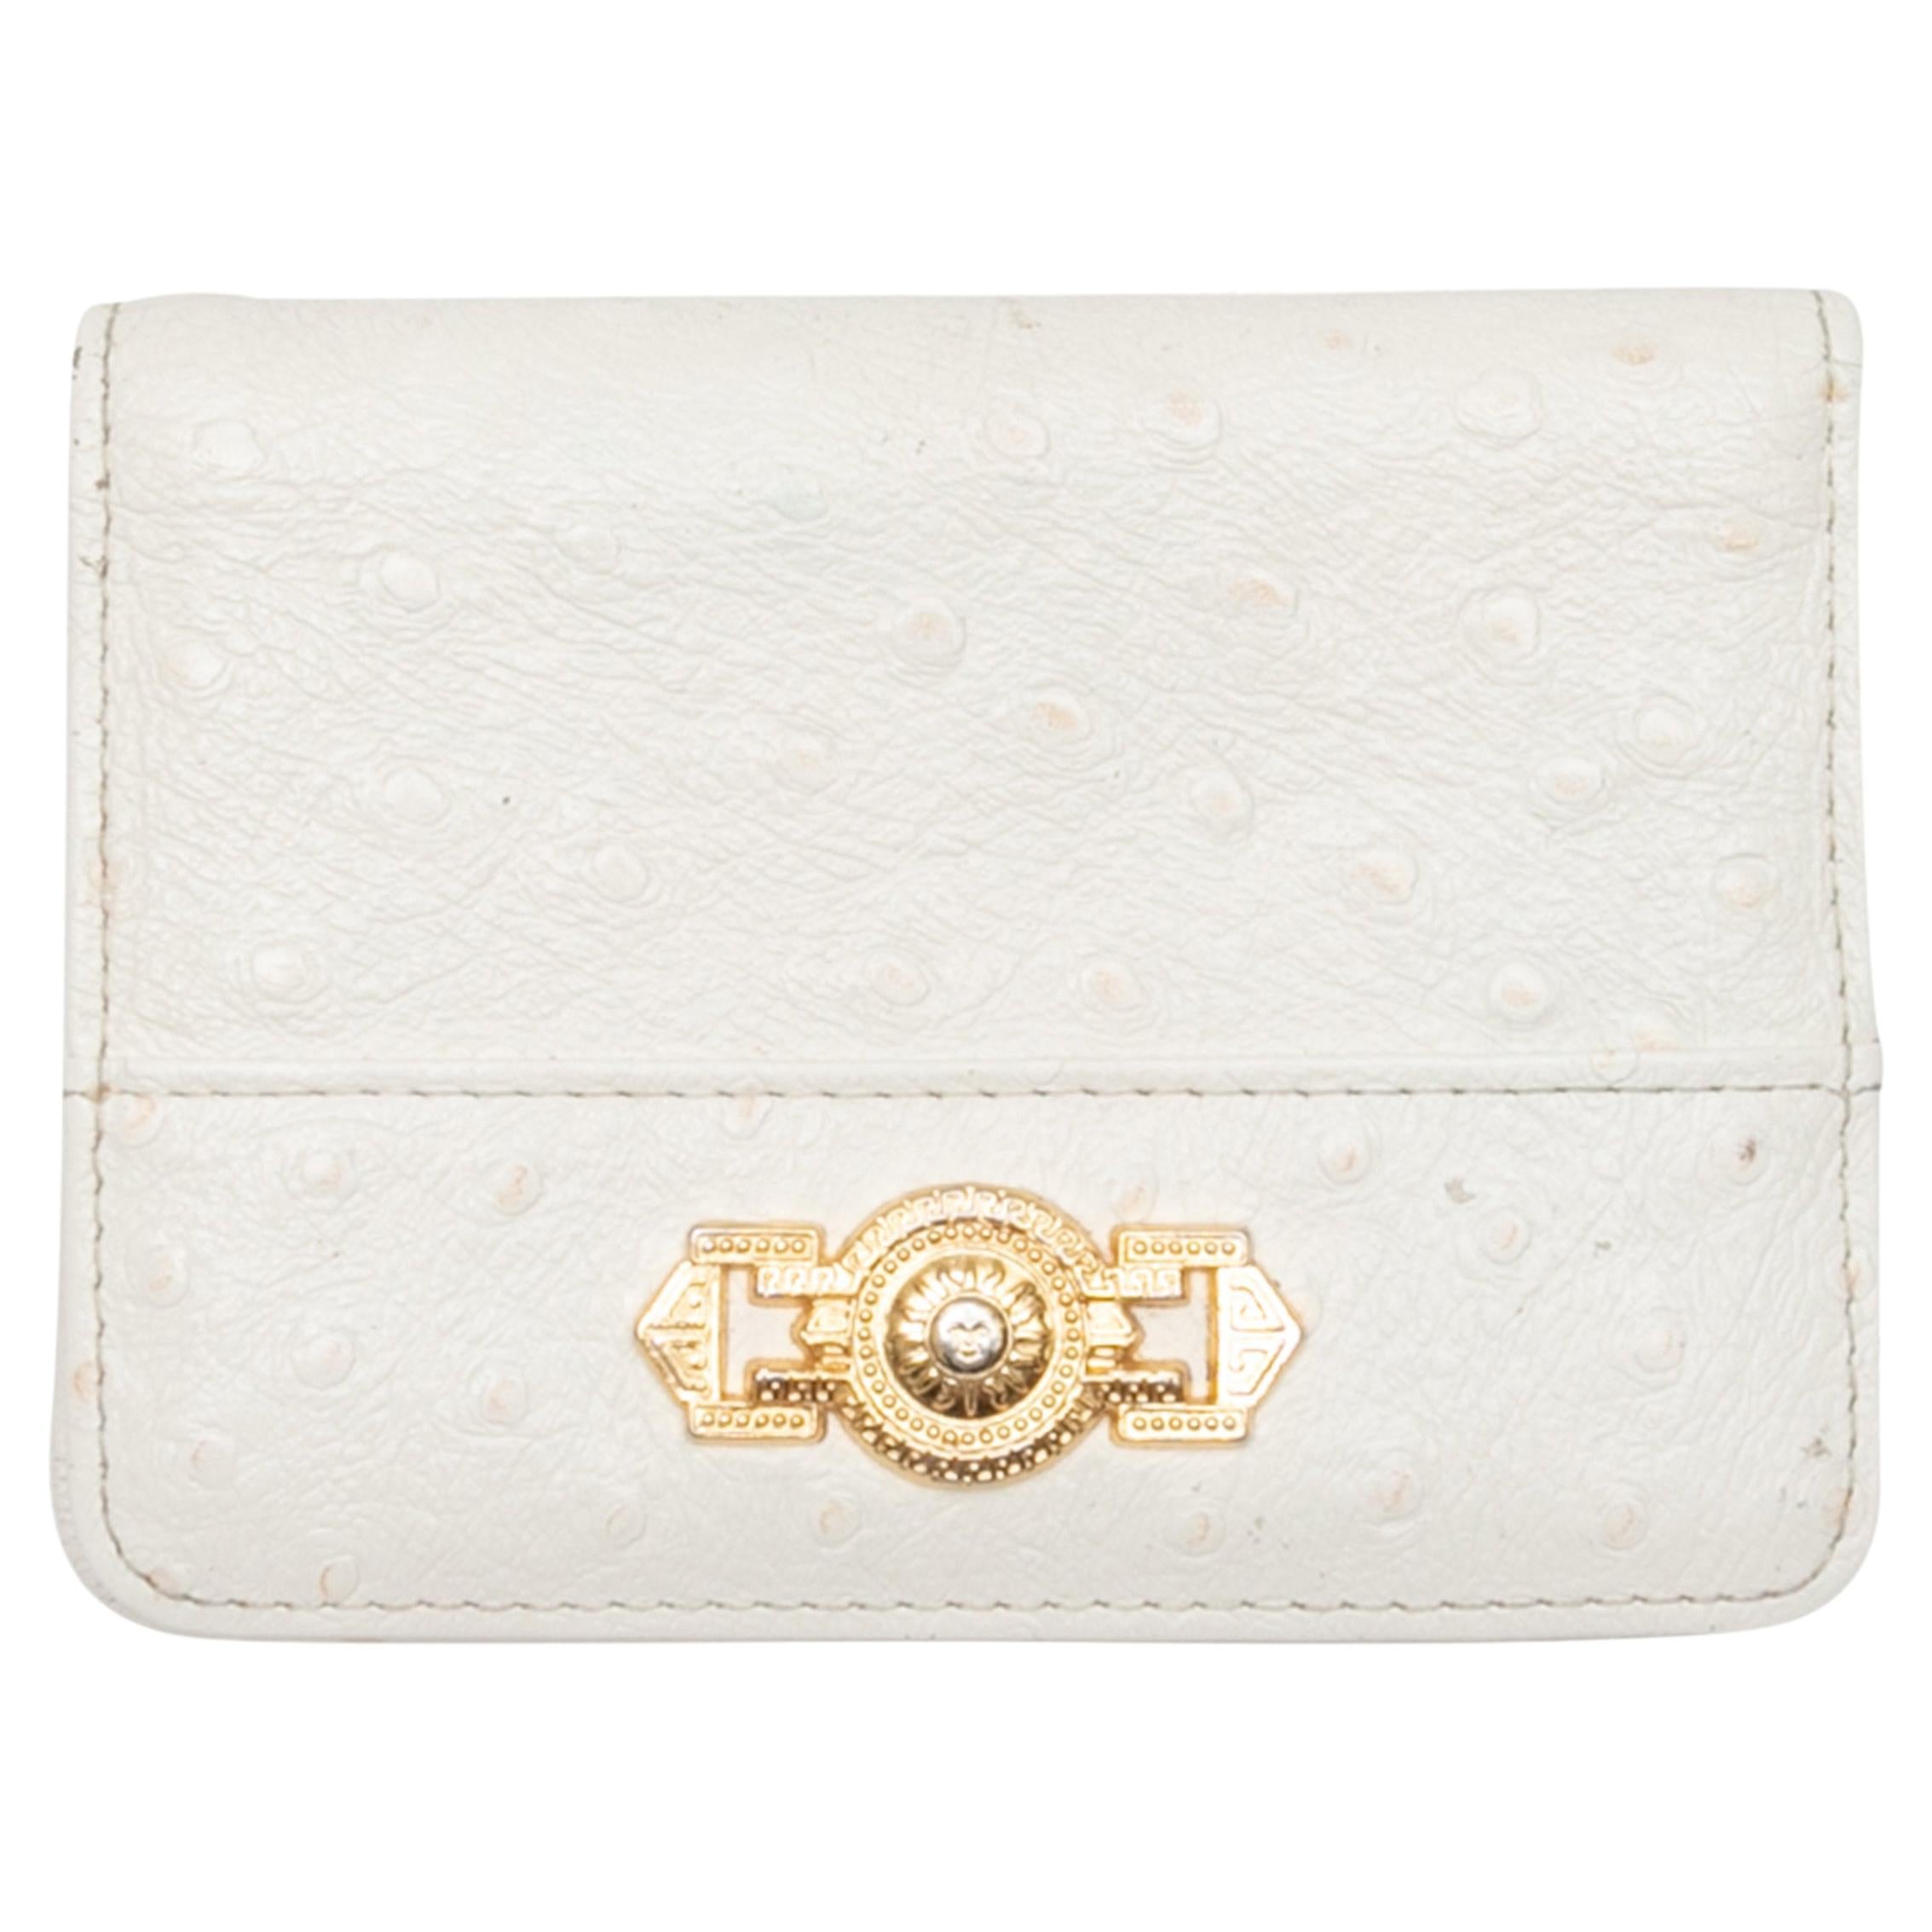 Vintage White Gianni Versace Ostrich Leather Wallet